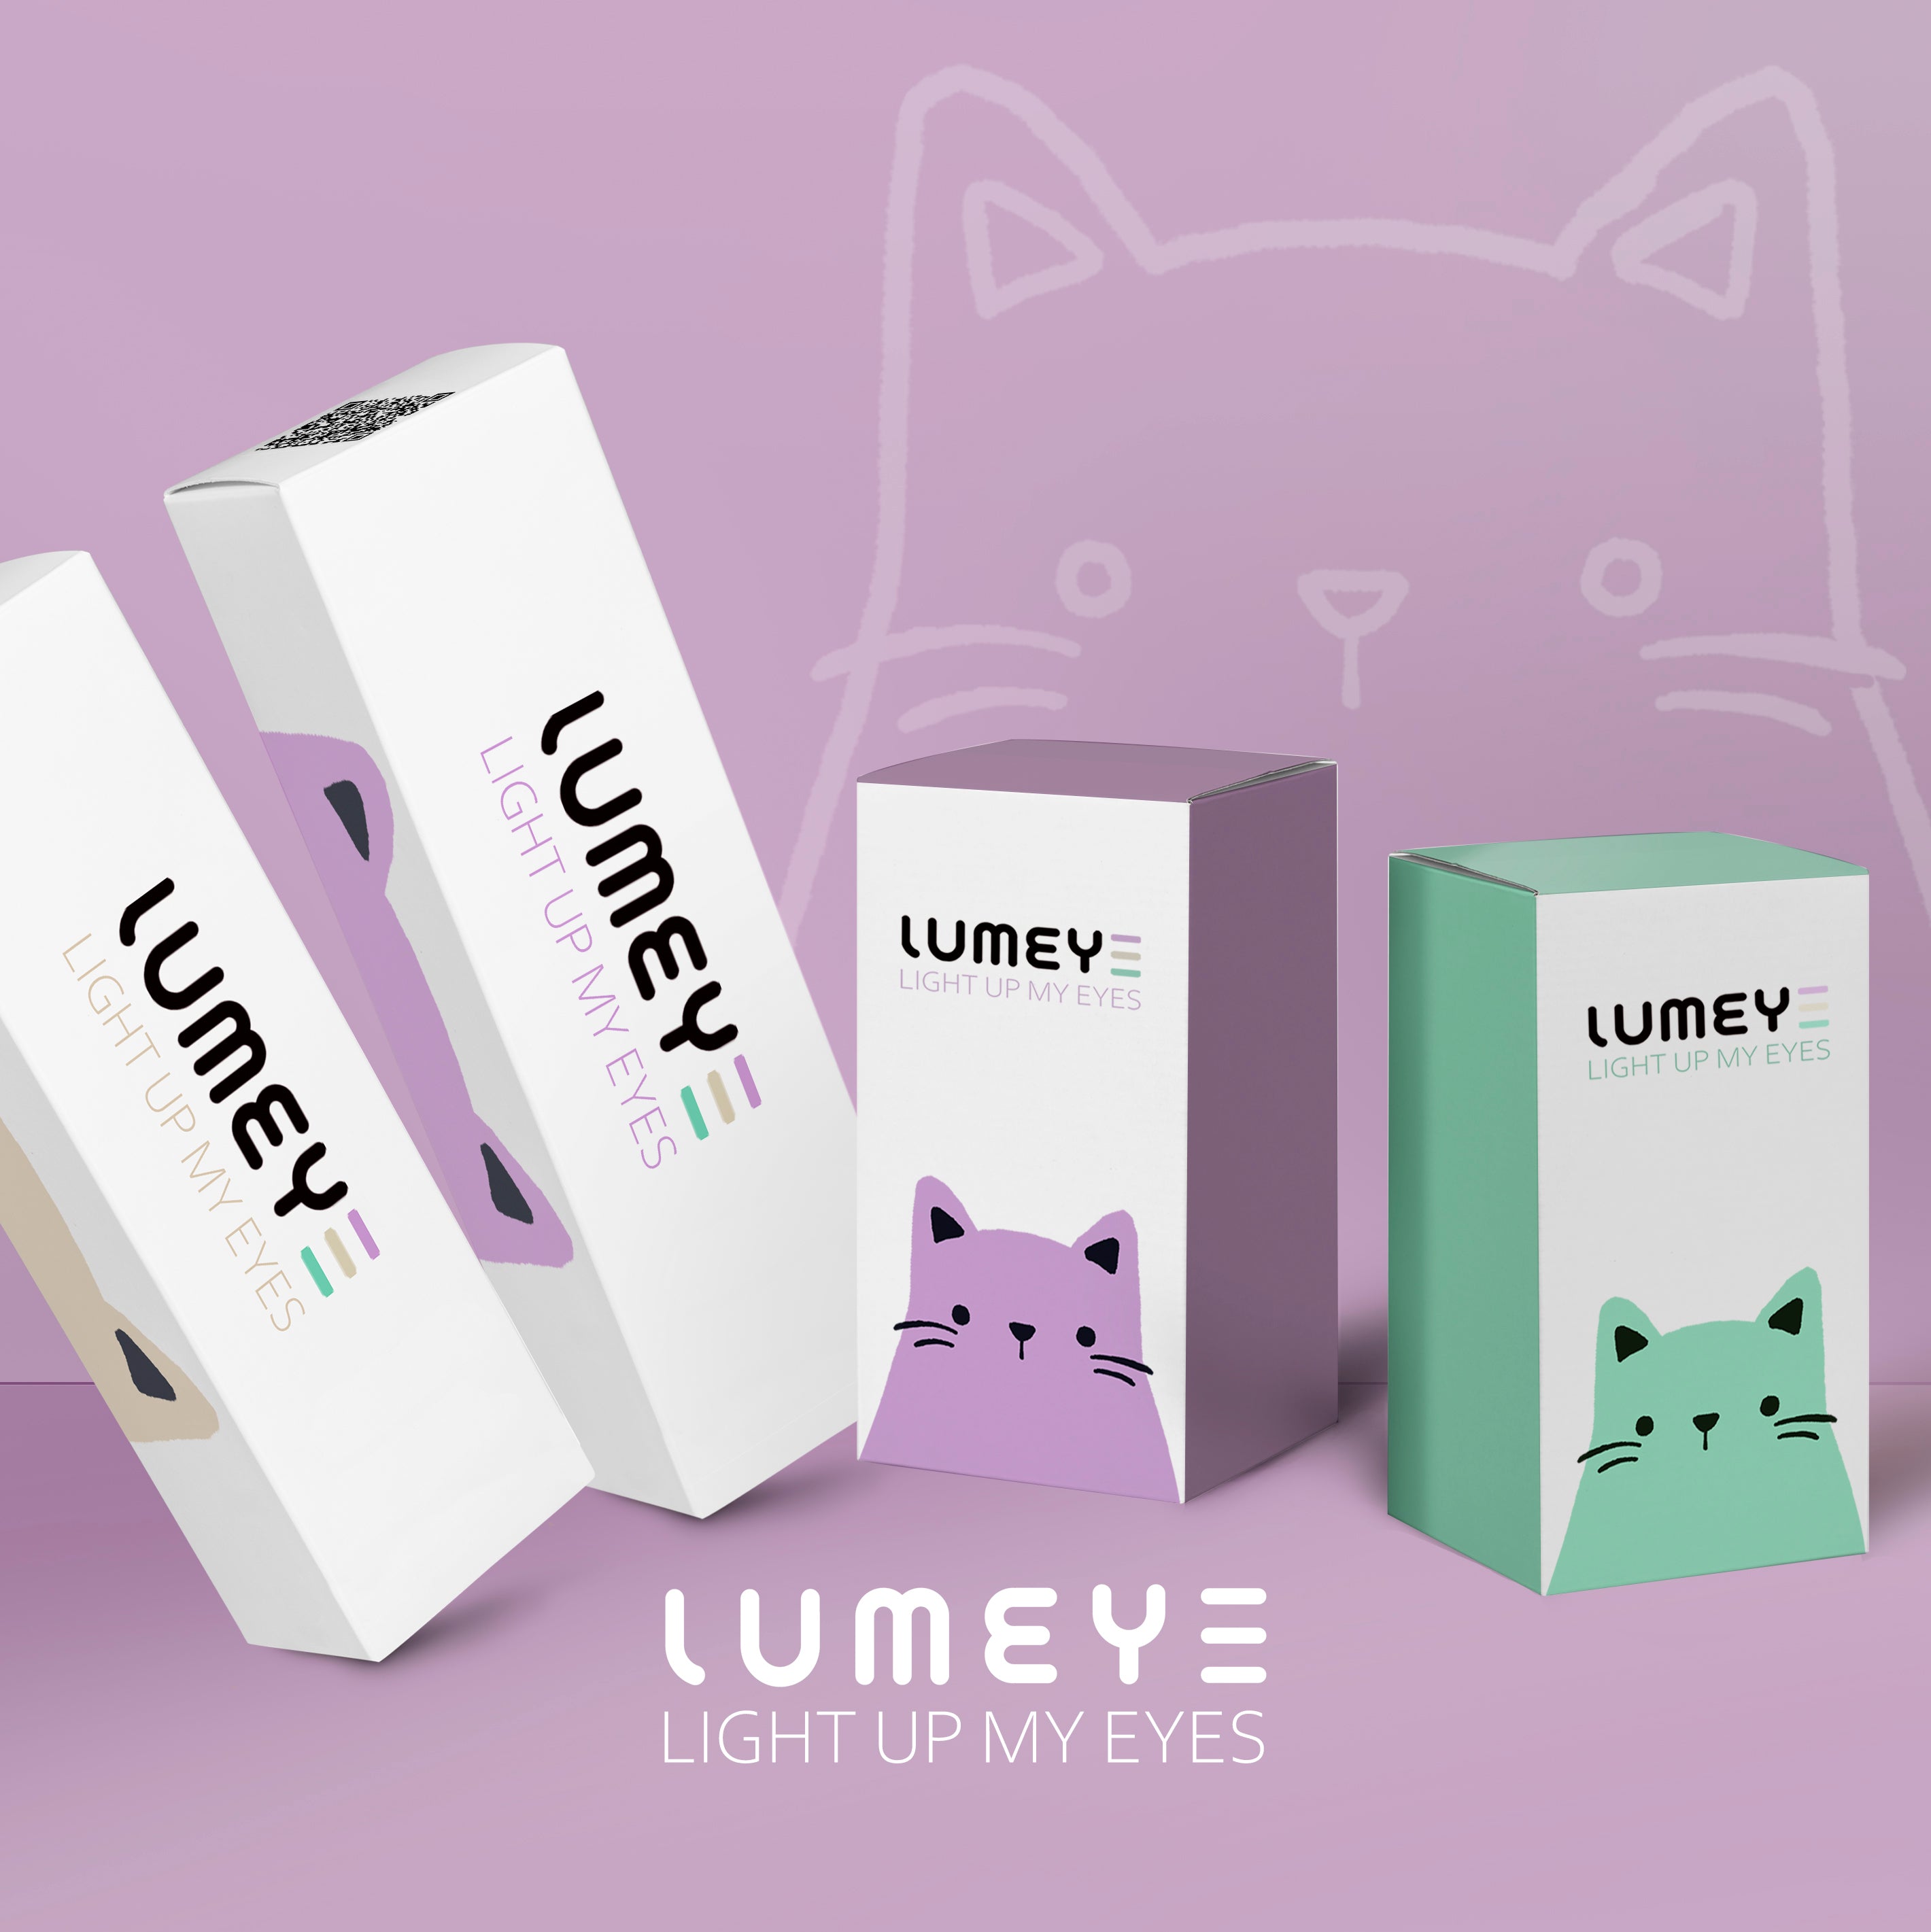 Best COLORED CONTACTS - LUMEYE Dawn Green Colored Contact Lenses - LUMEYE